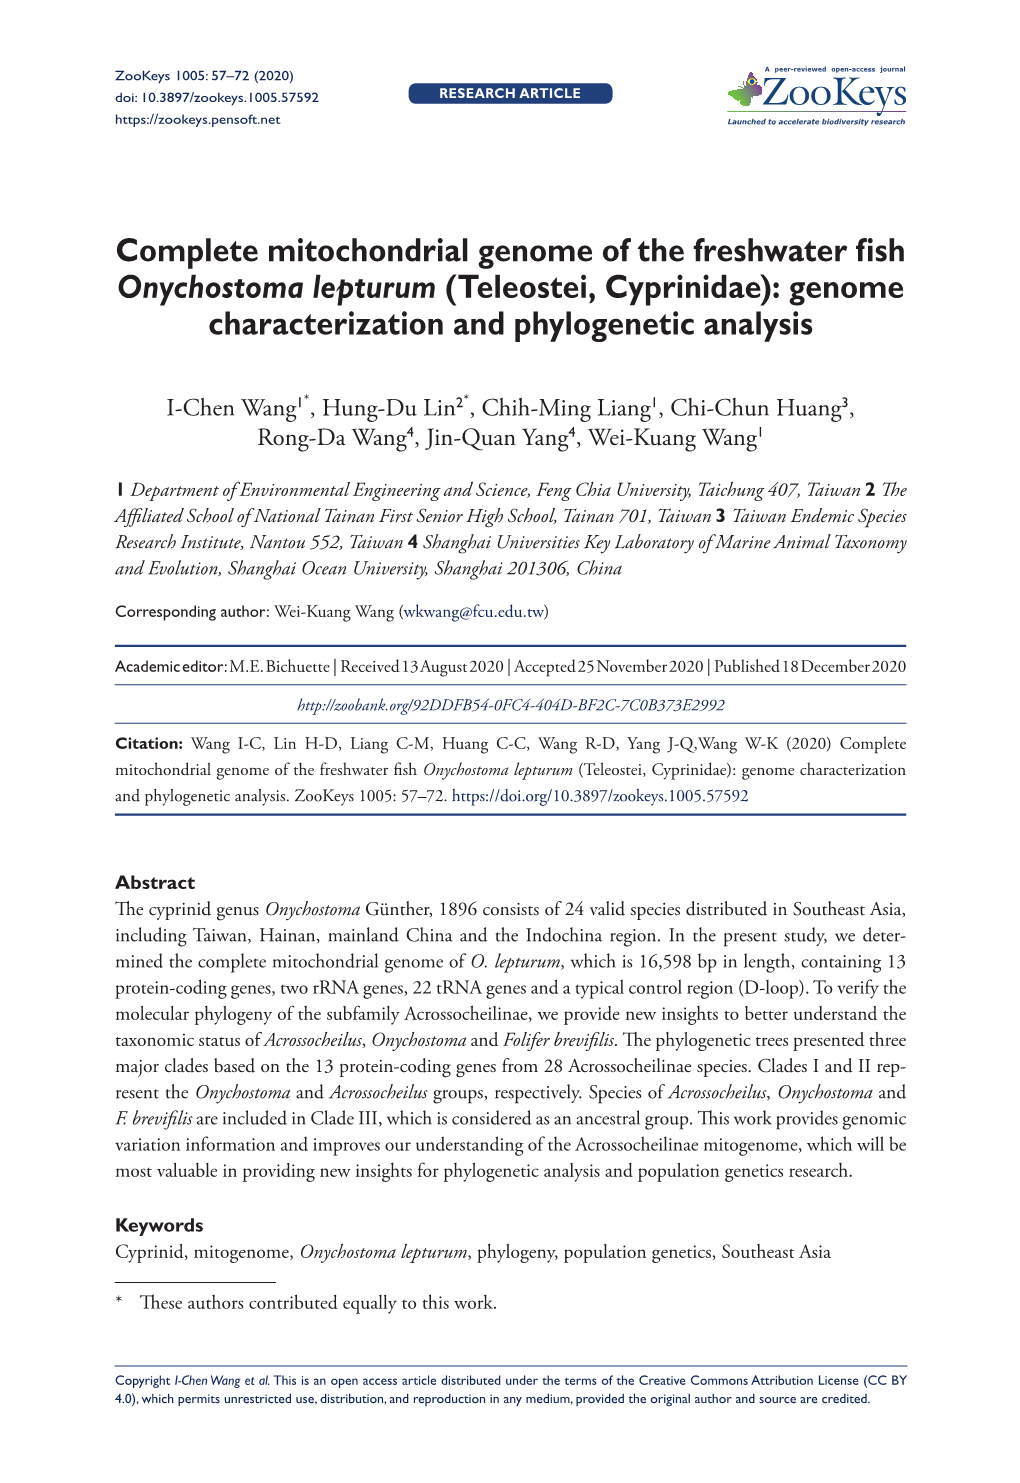 Complete Mitochondrial Genome of the Freshwater Fish Onychostoma Lepturum (Teleostei, Cyprinidae): Genome Characterization and Phylogenetic Analysis